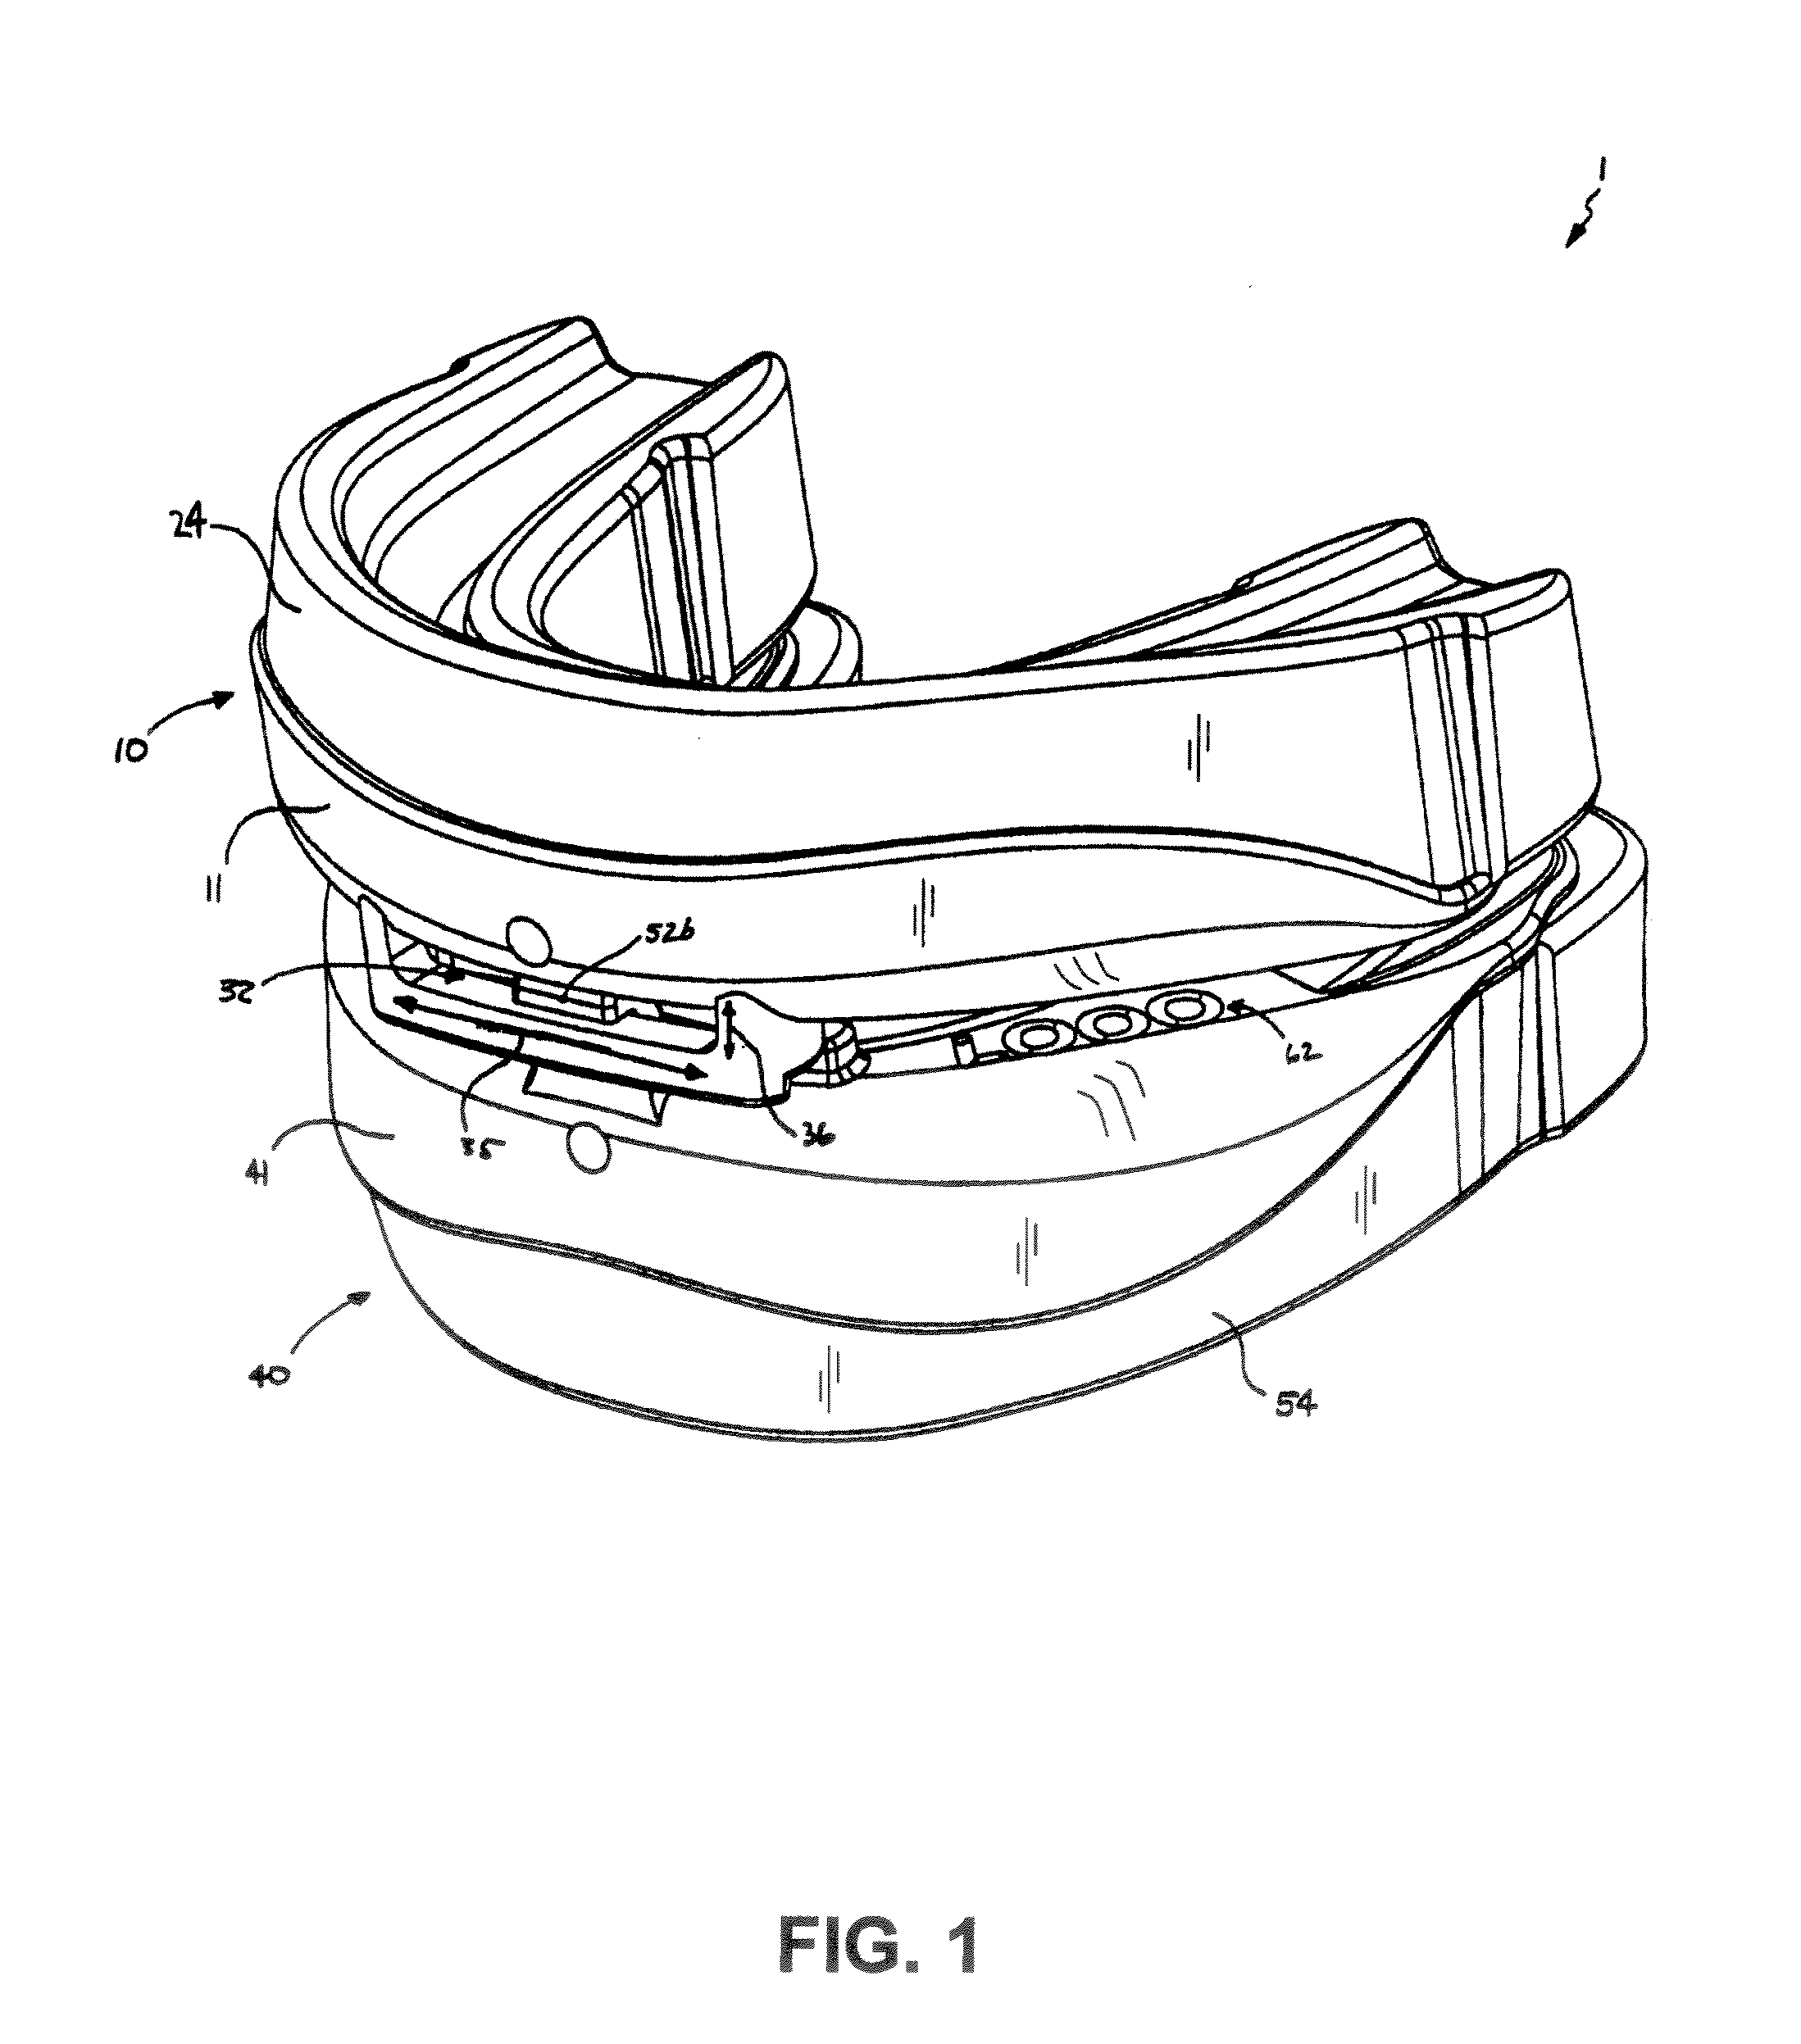 Oral appliance for treatment of snoring and sleep apnea